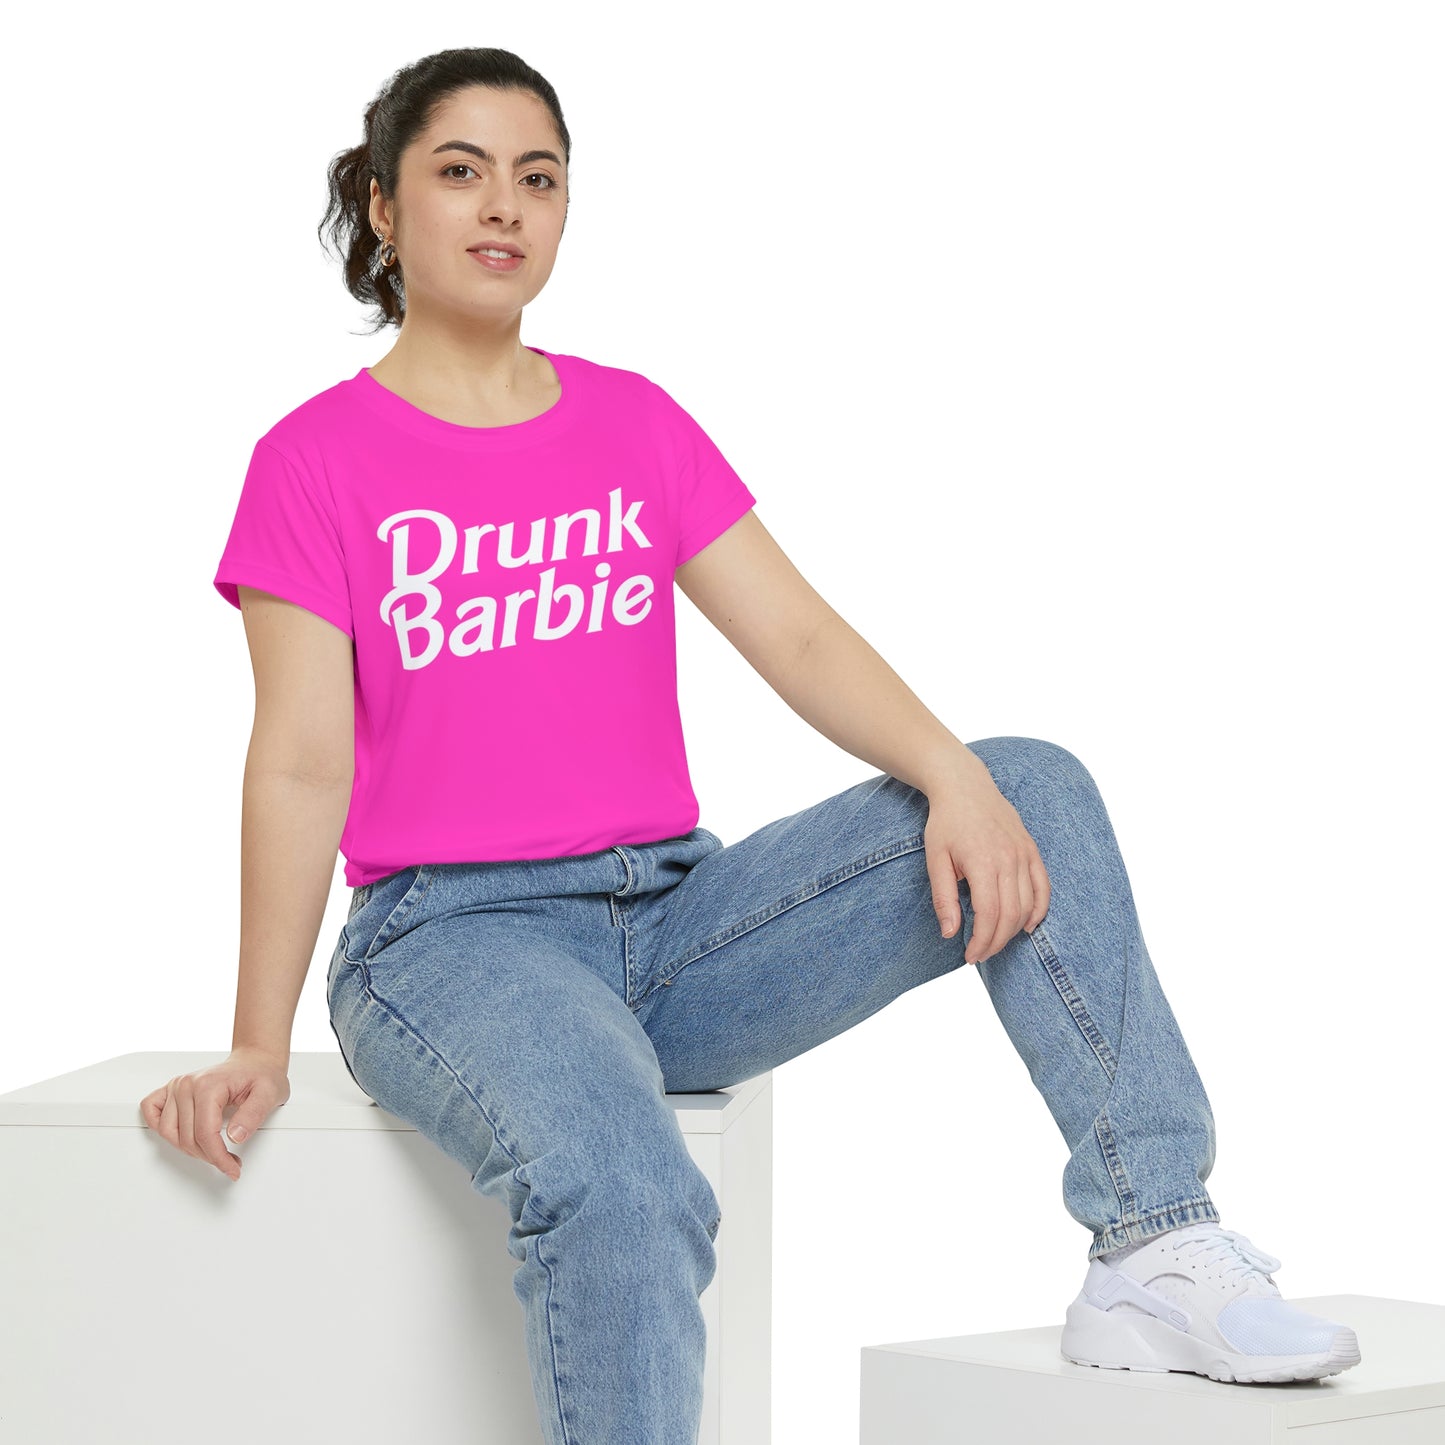 Drunk Barbie, Bachelorette Party Shirts, Bridesmaid Gifts, Here comes the Party Tees, Group Party Favor Shirts, Bridal Party Shirt for women